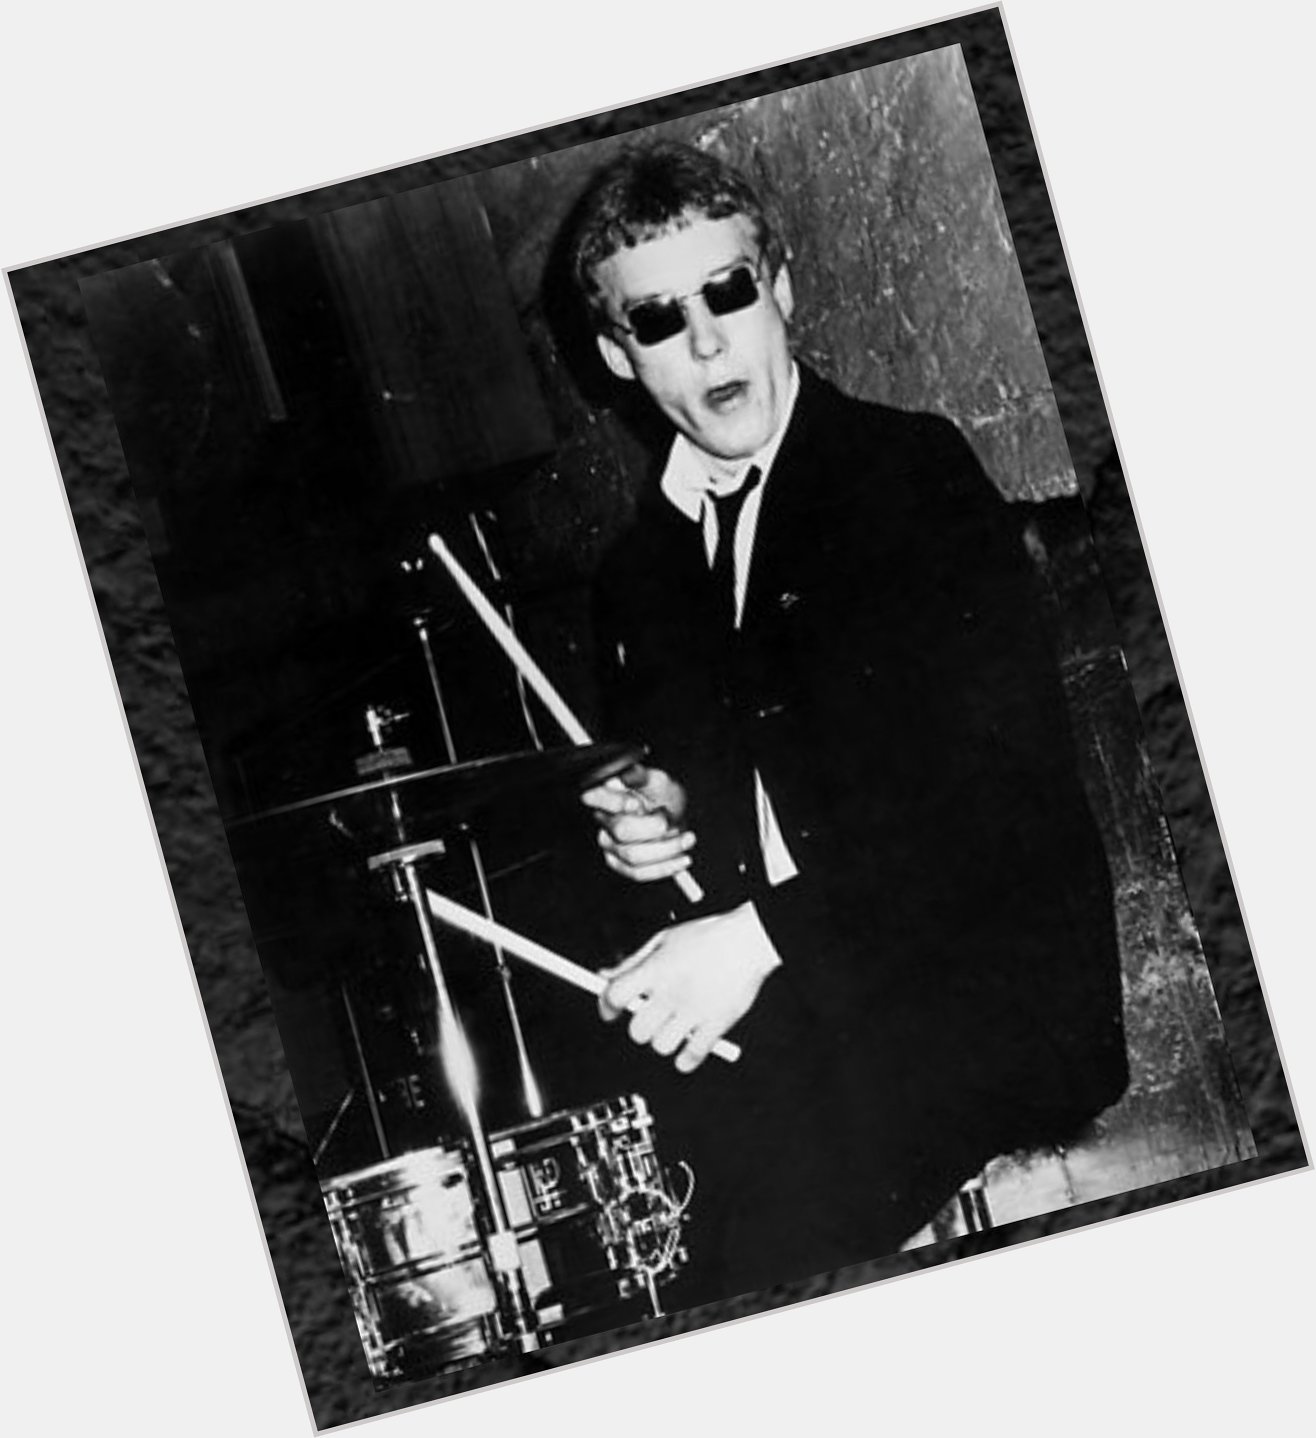 Some love for the drummers today. Happy Birthday to Rick Buckler of The Jam and Dave Lovering of the Pixies. 